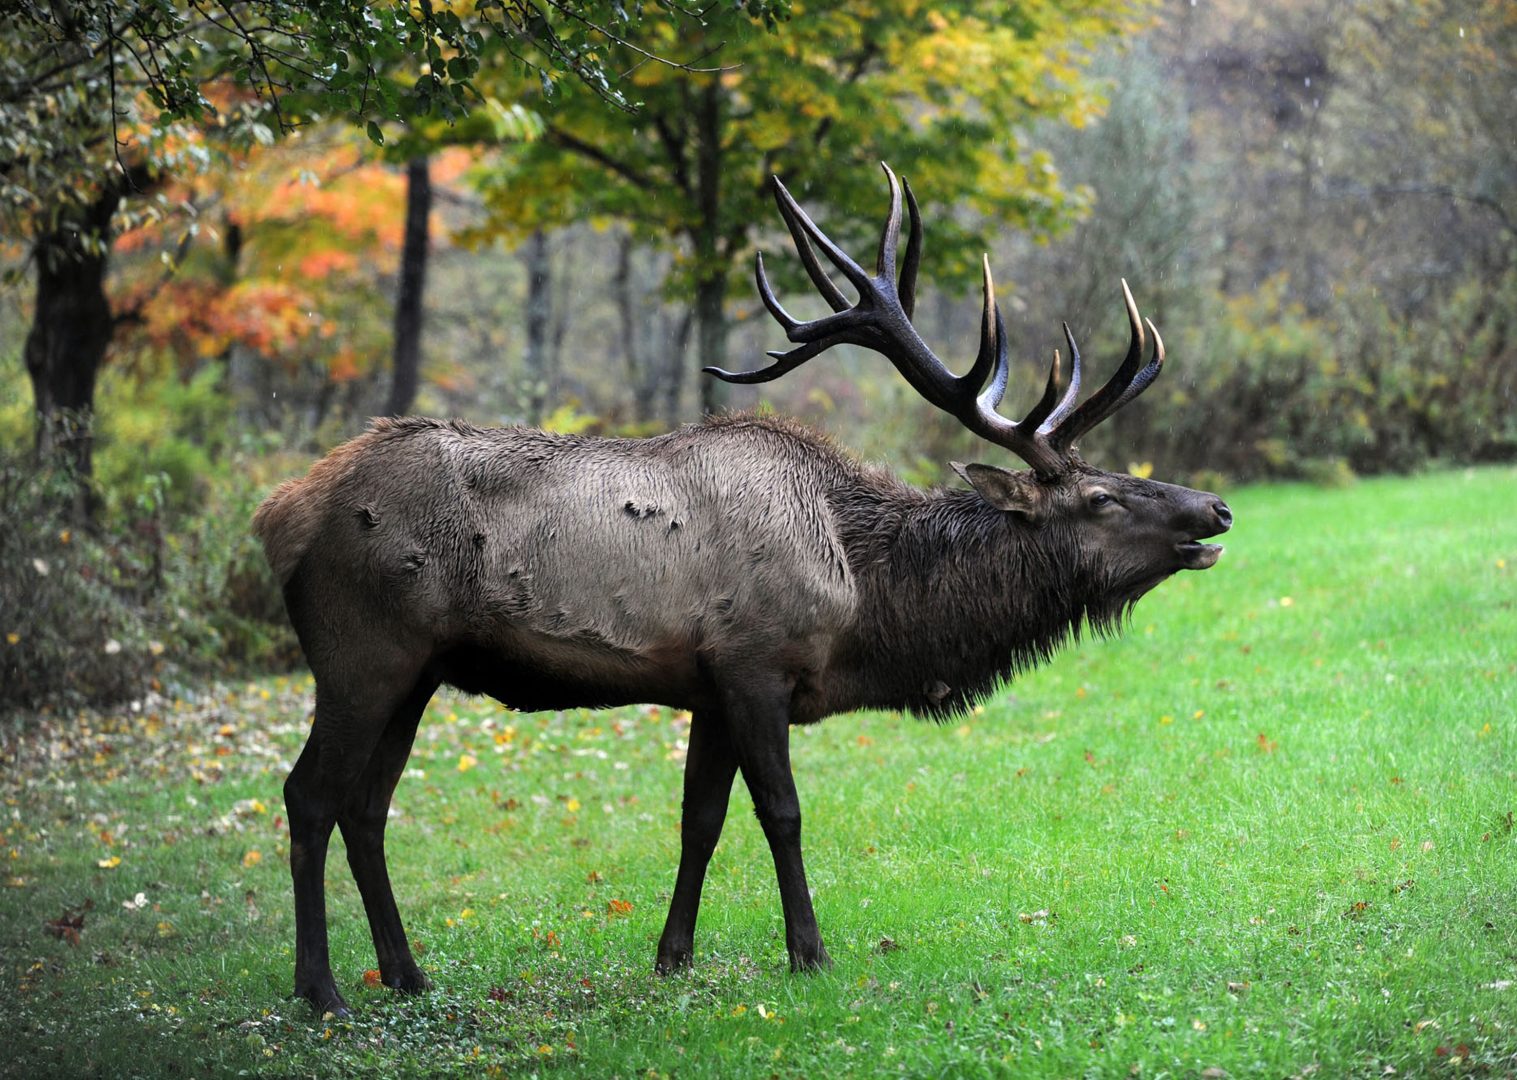 An elk near the Elk County Visitor Center, which is located on DCNR land.